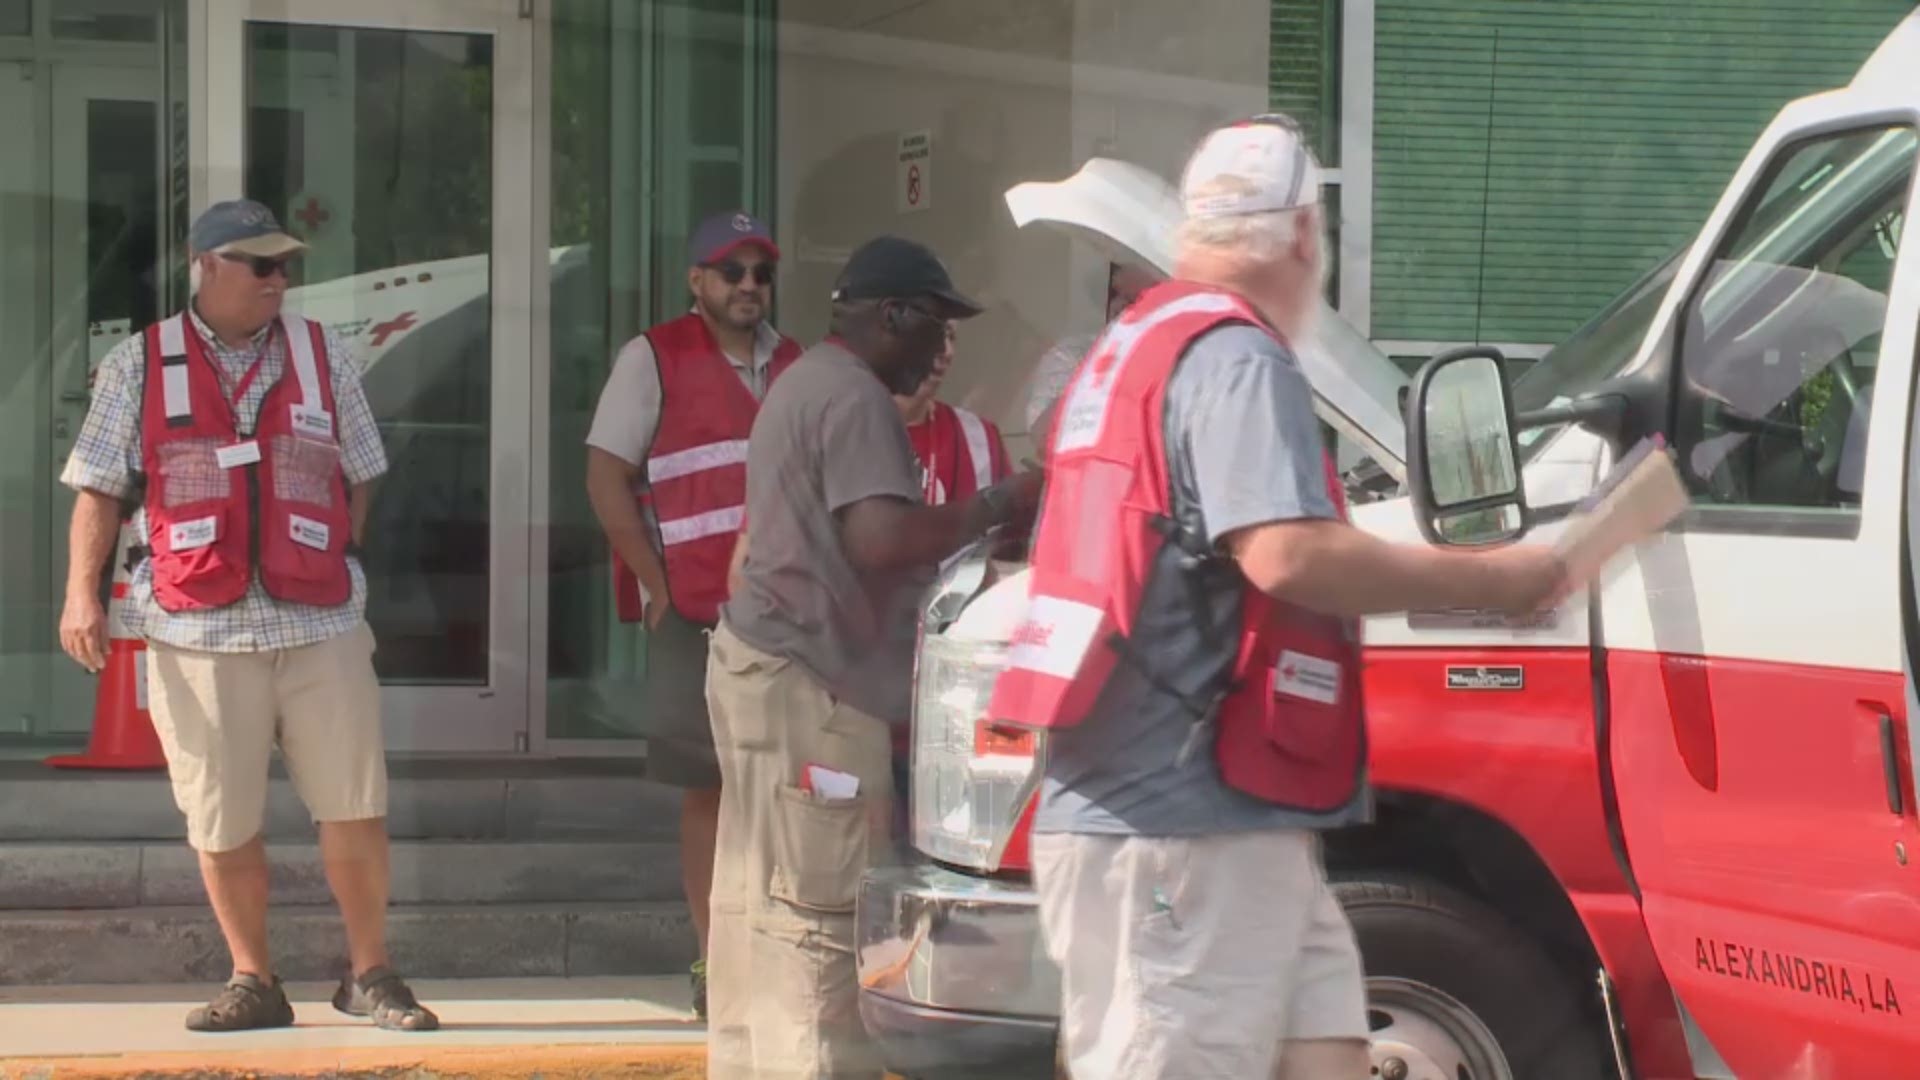 Volunteers with the American Red Cross are heading to areas directly affected by Tropical Storm Barry with food, water and cleaning supplies in order to provide relief. They departed Atlanta on Sunday in special disaster response vehicles.